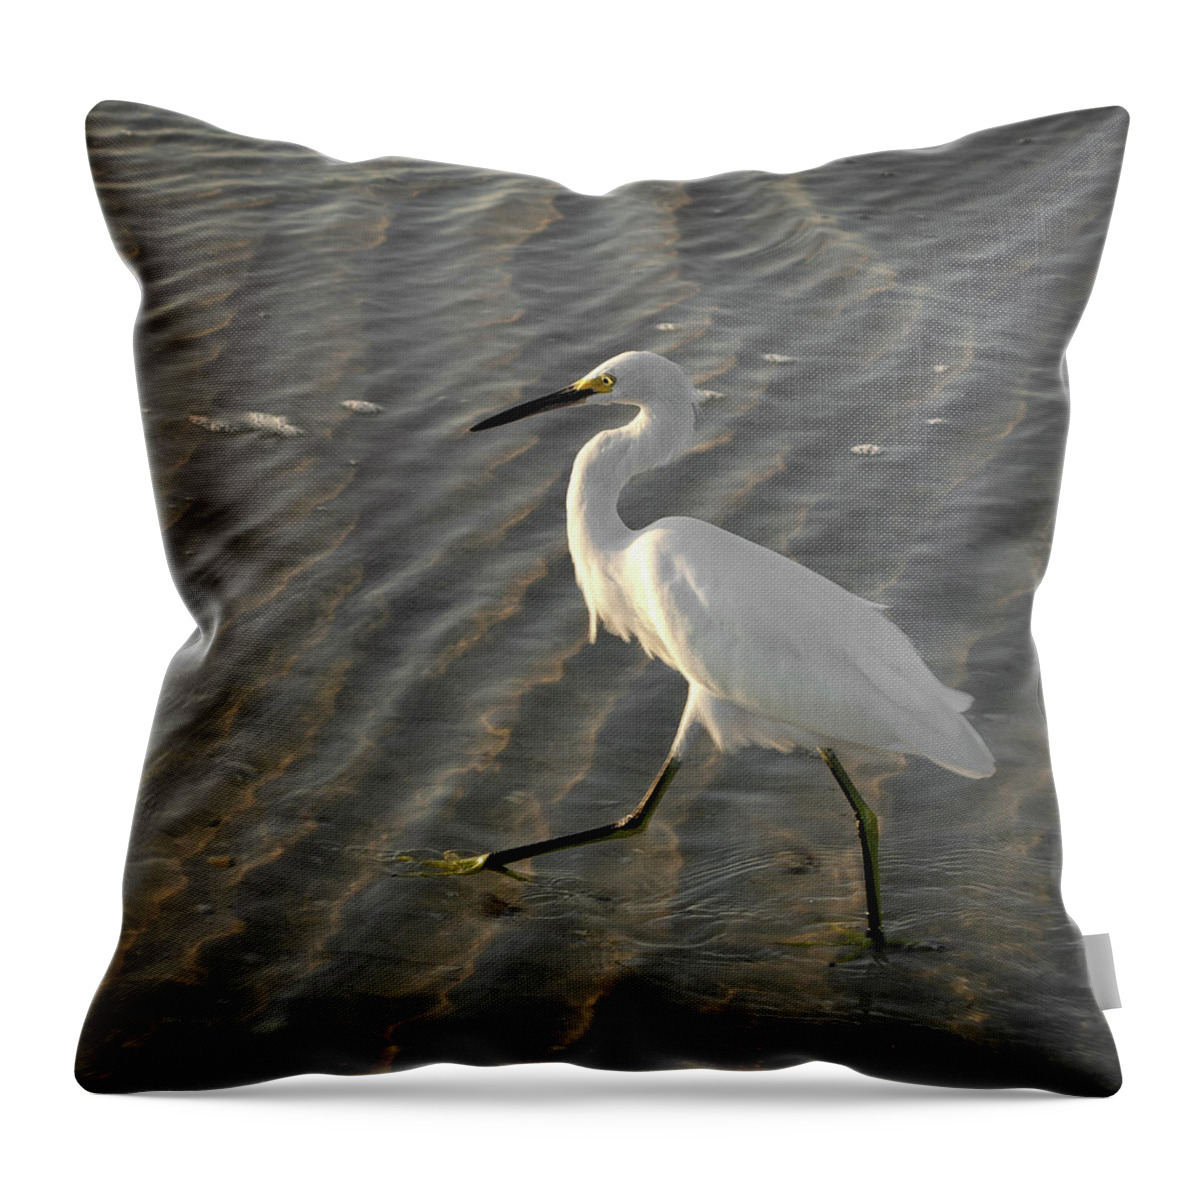 Highstepping Throw Pillow featuring the photograph High Stepping by Vicky Edgerly